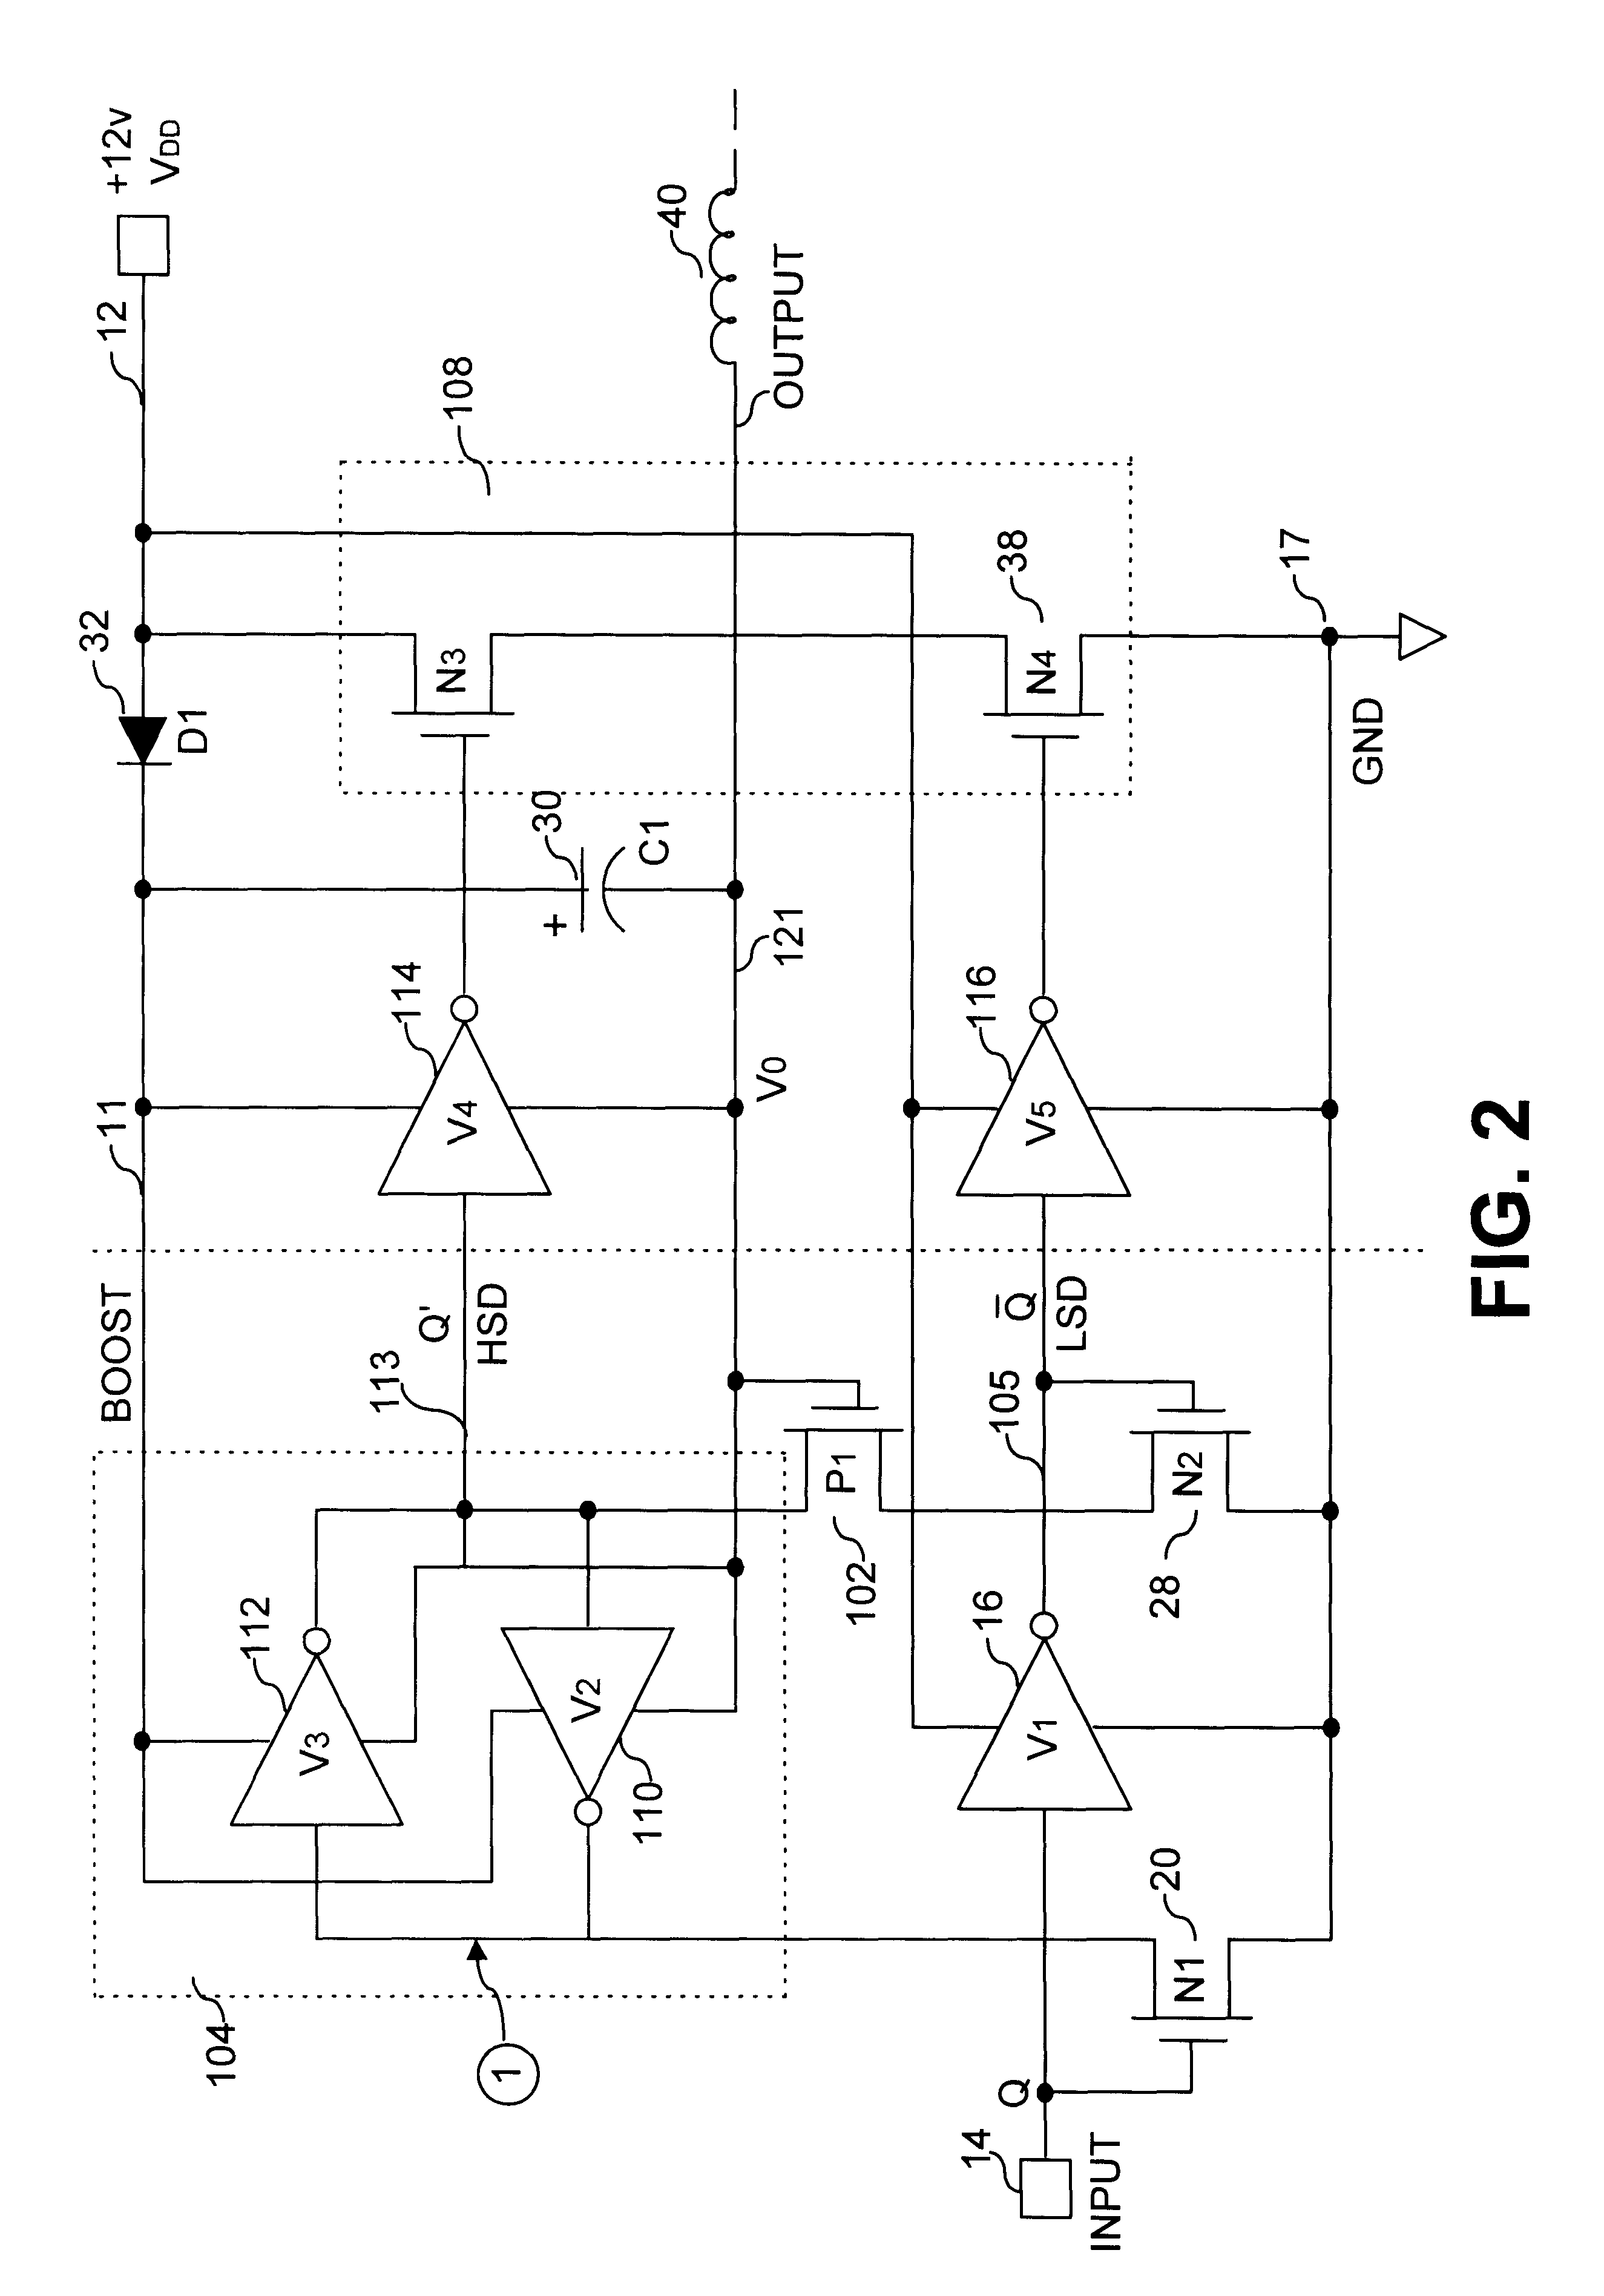 Clamped cascode level shifter circuit